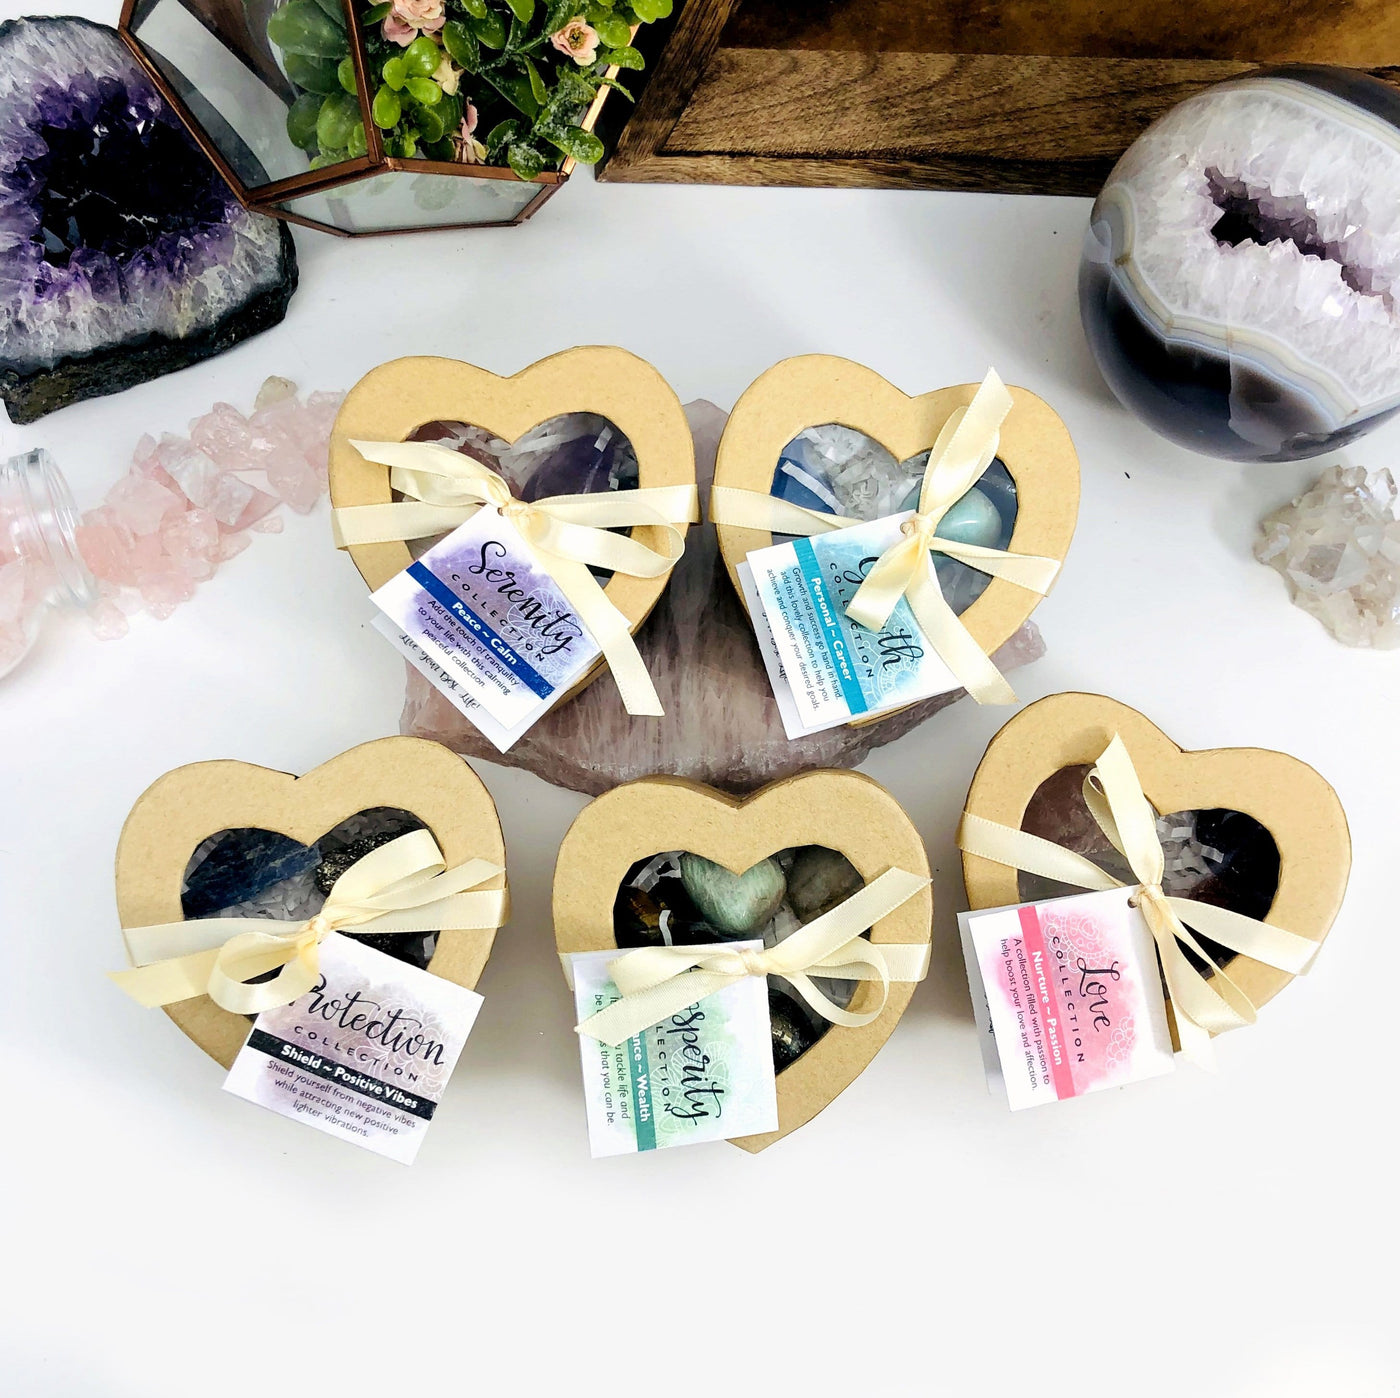 Crystal Healing Love Set of Stones in Heart Shaped Box  -  5 different  ones shown on a table